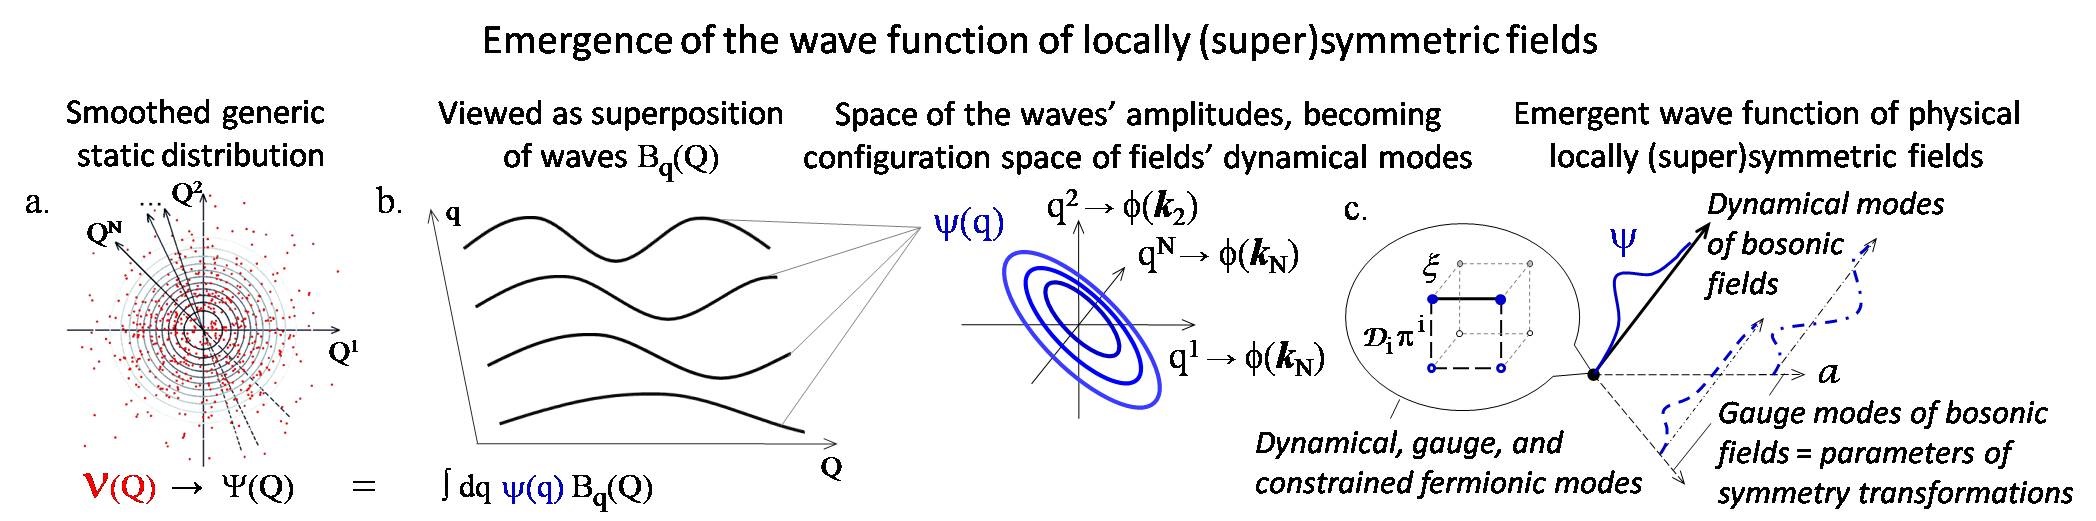 Emergence of the wave function of locally supersymmetric fields